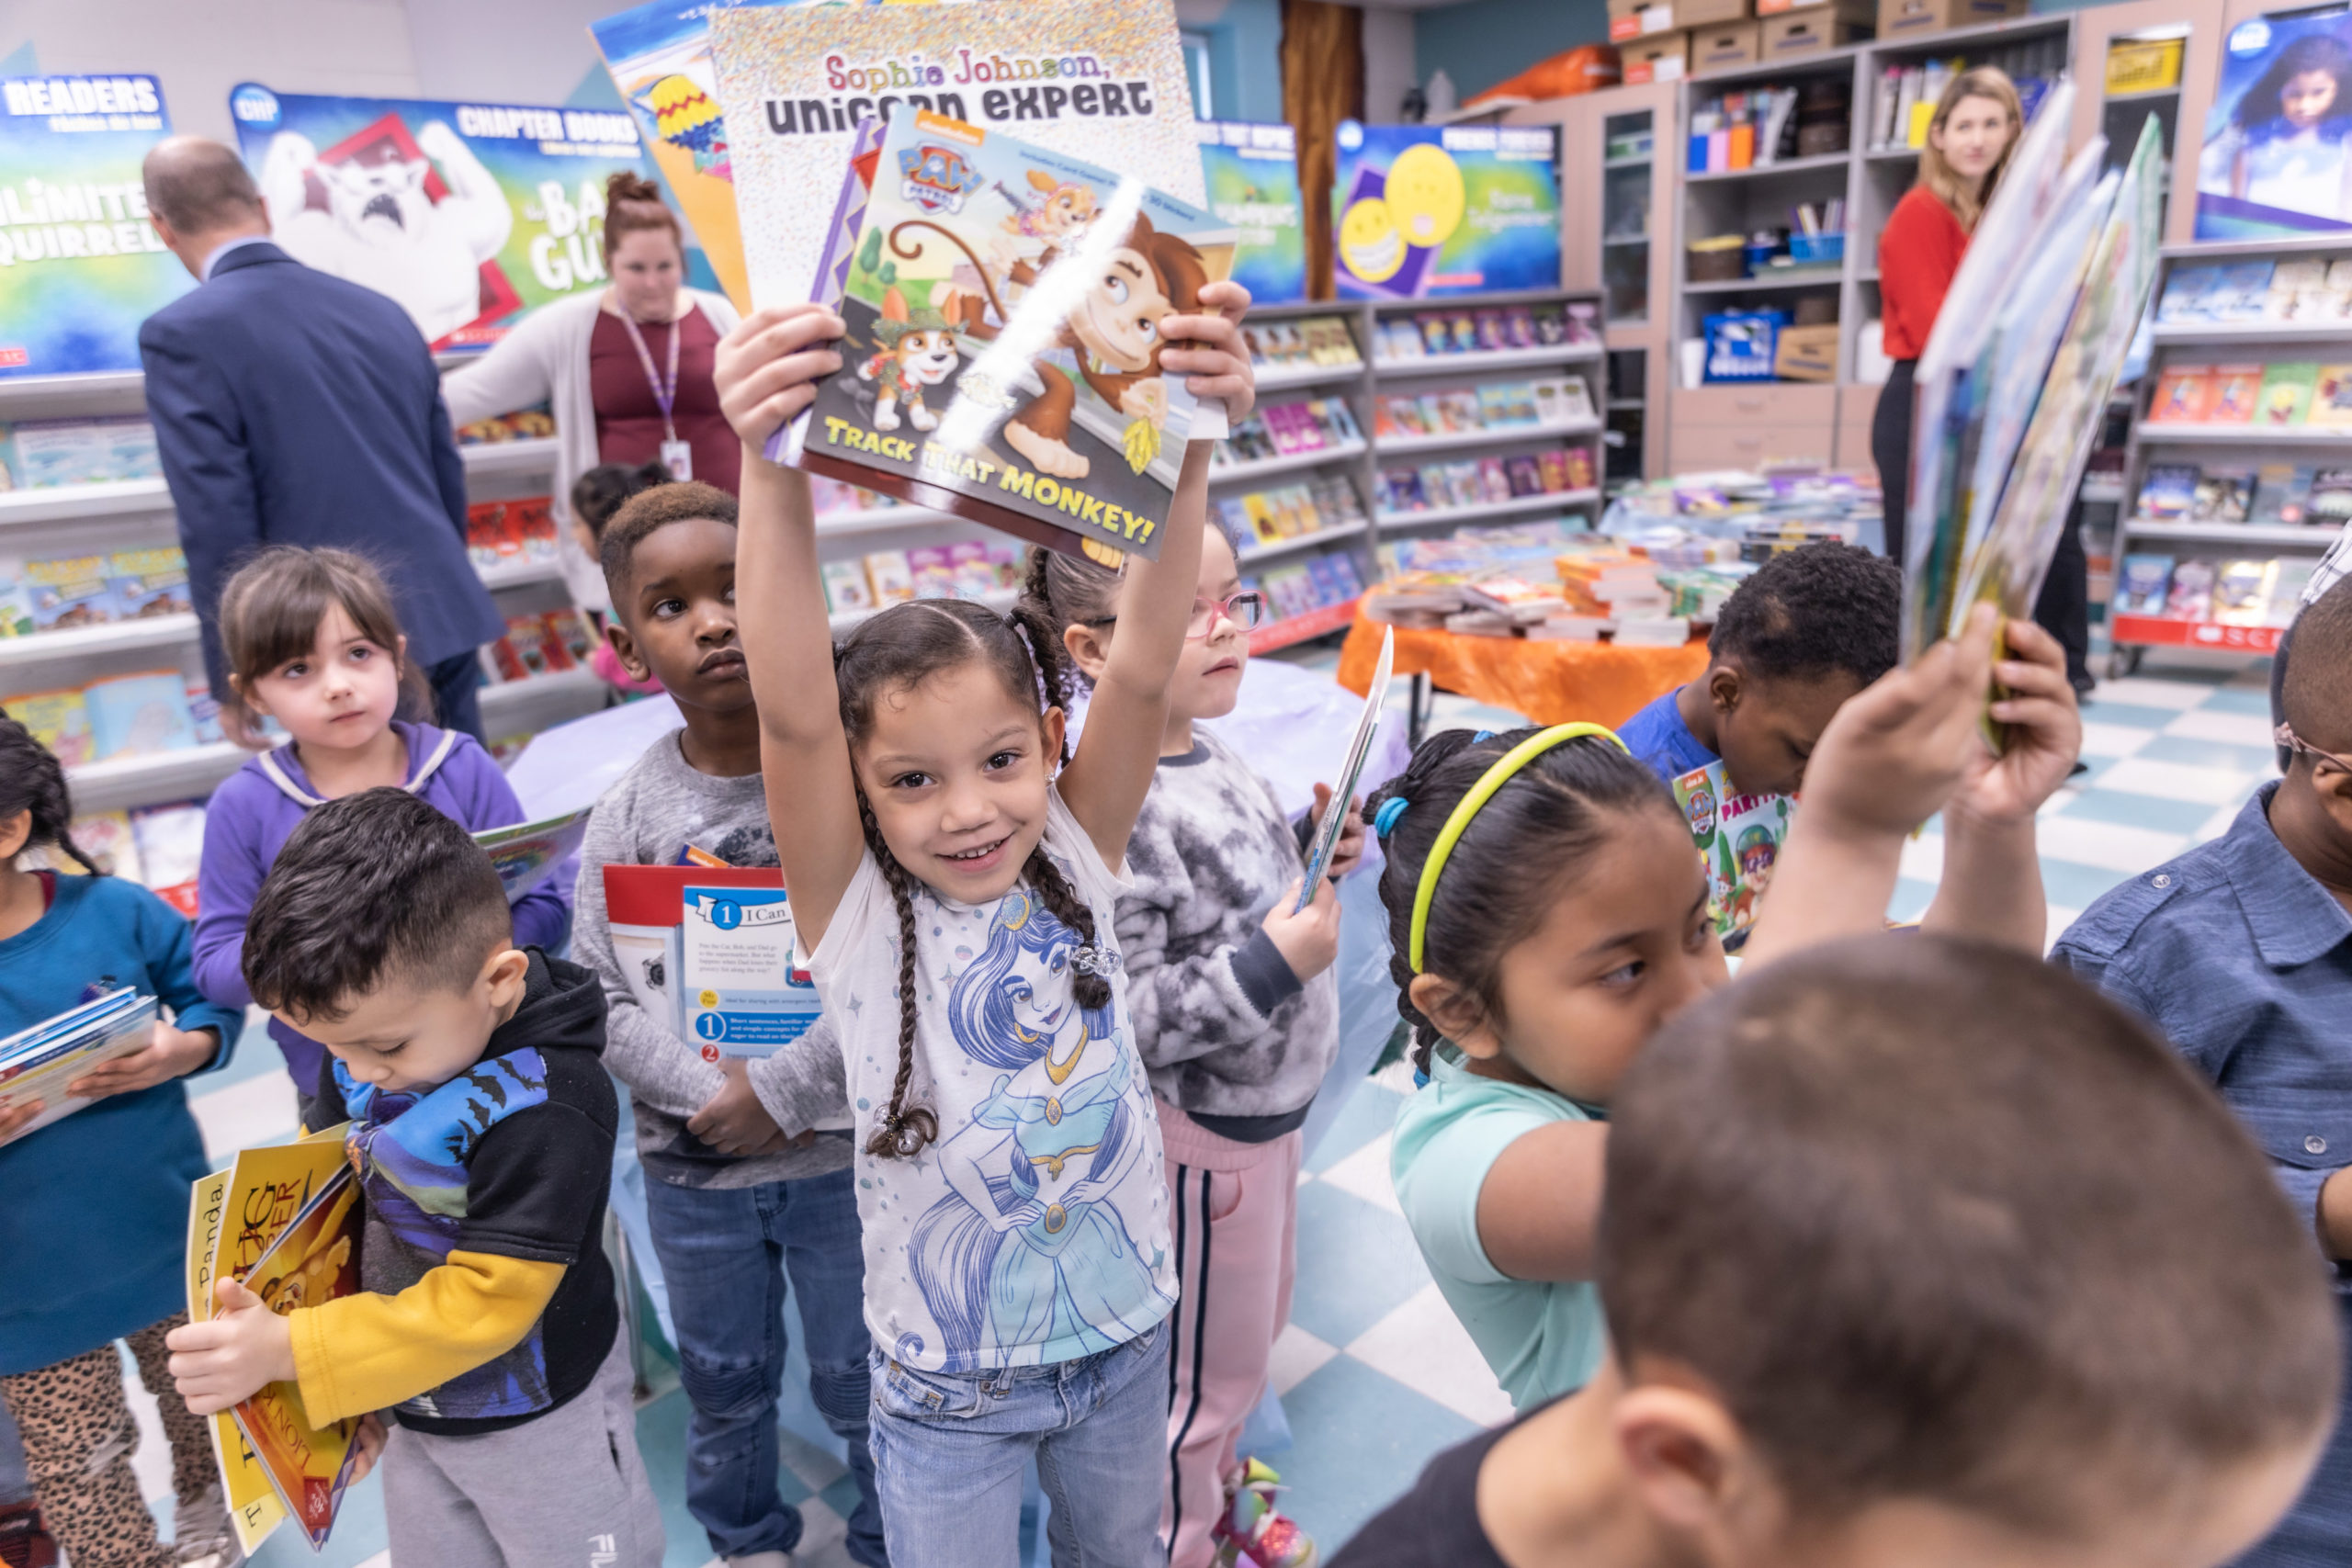 Photo of a girl holding up books during a book fair provided by 